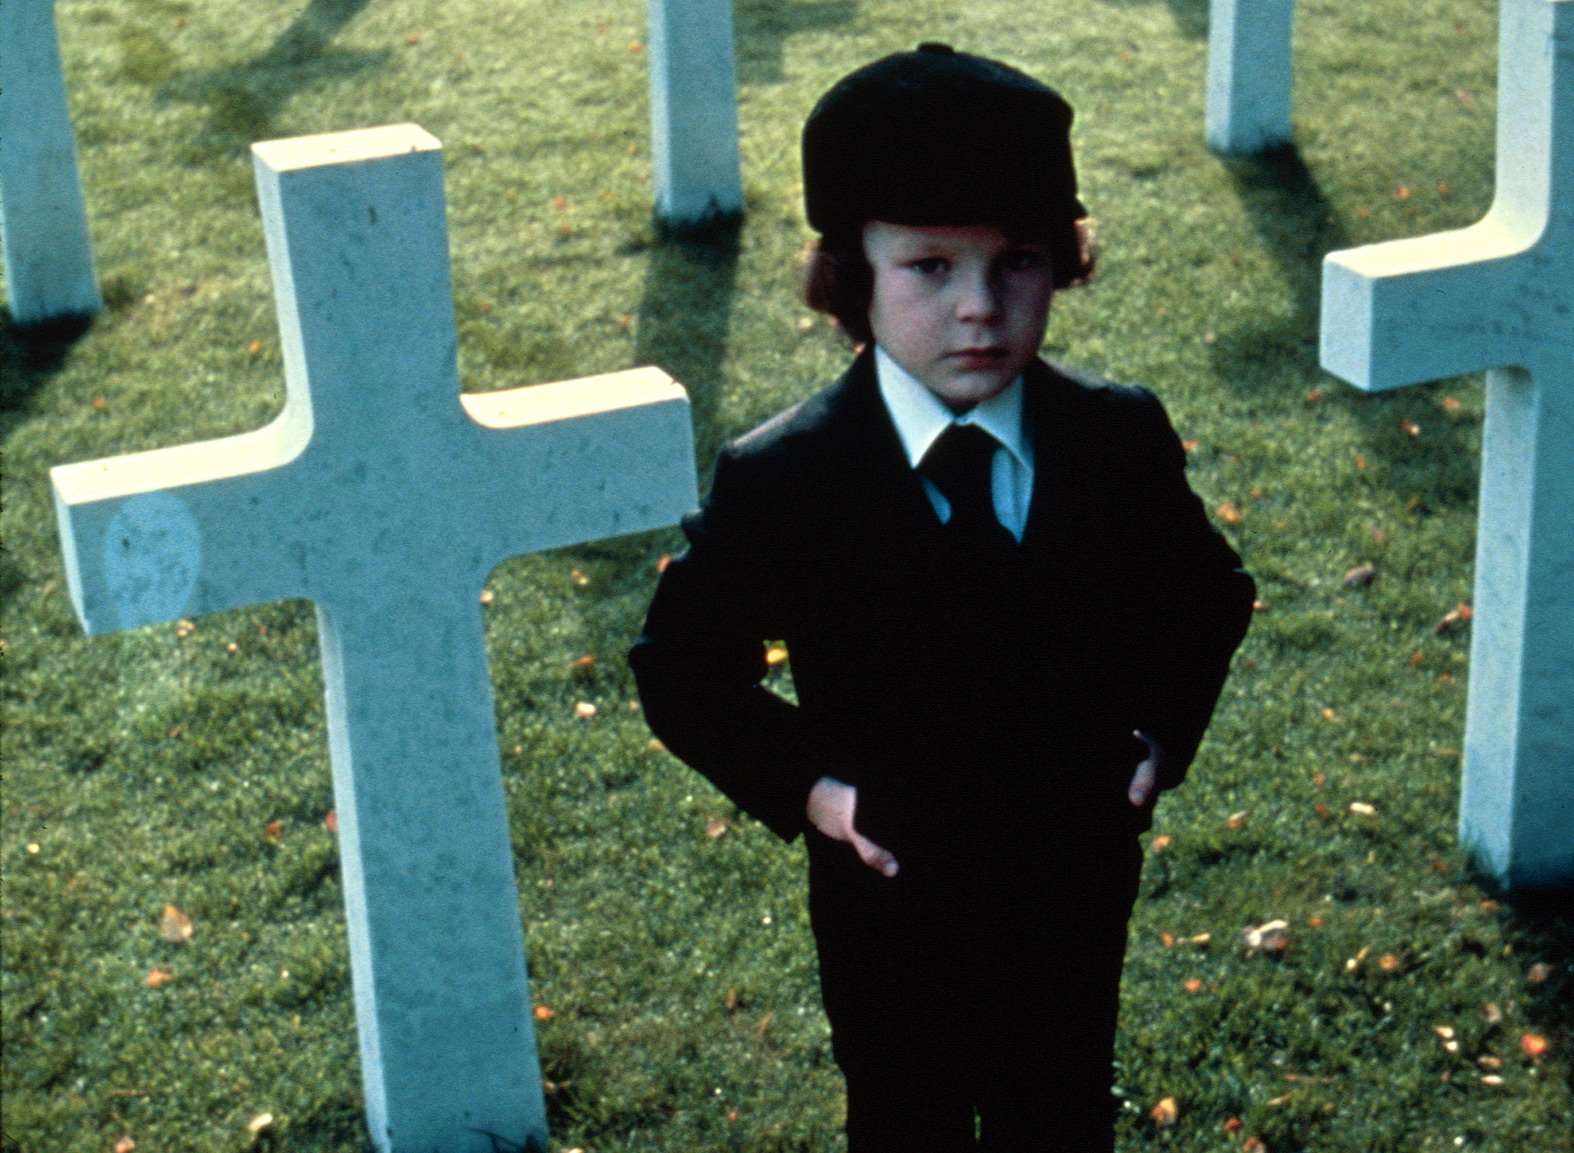 Harvey Stephens, who played Damien in The Omen